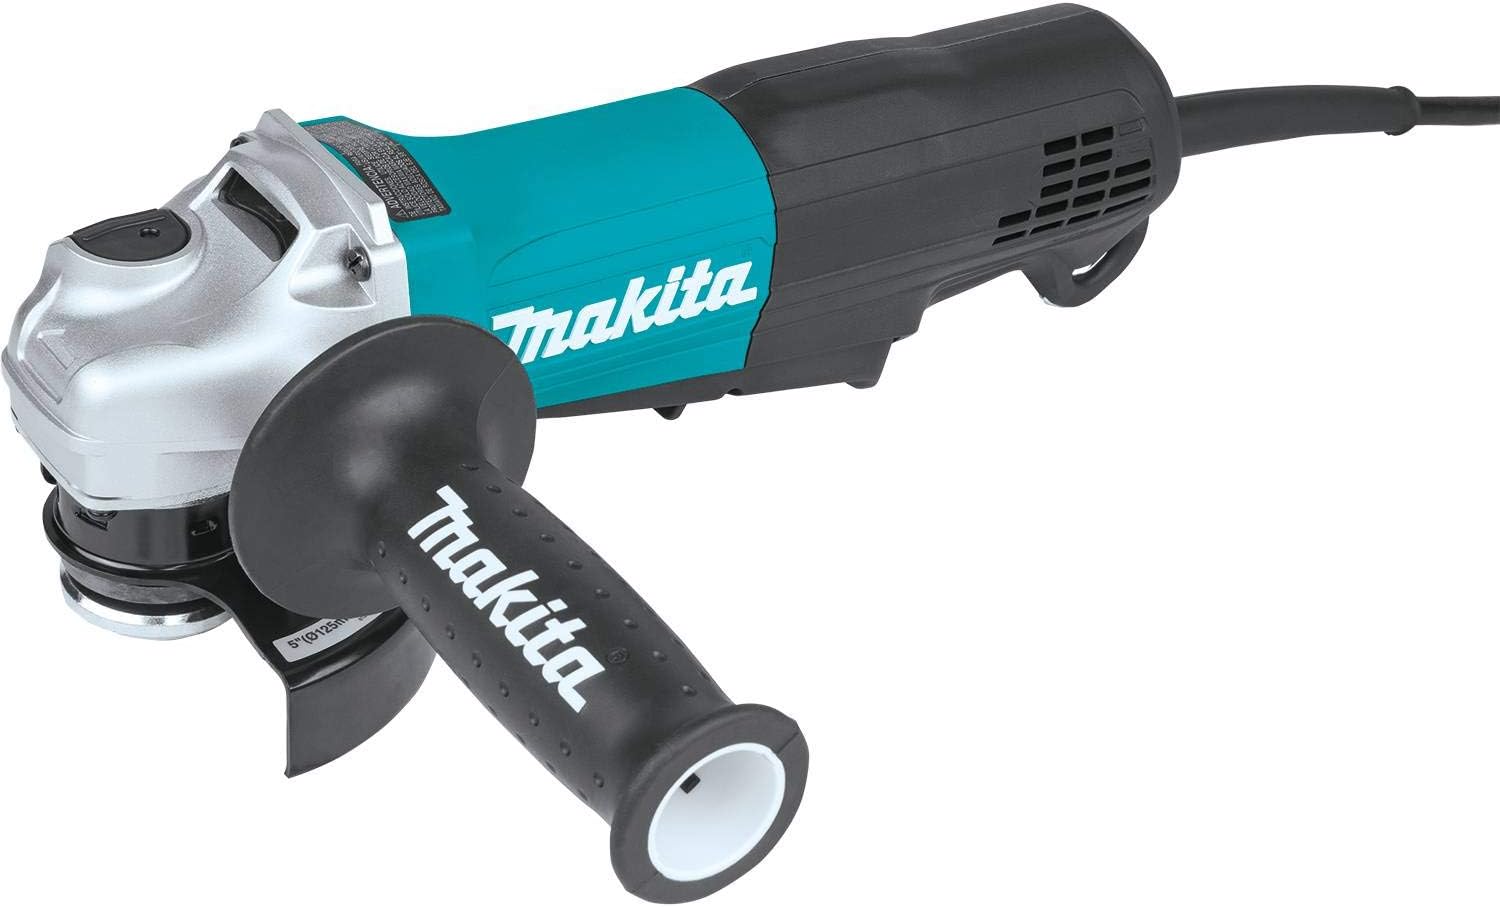 Makita GA5053R 4-1/2 / 5 Paddle Switch Angle Grinder, with Non-Removable Guard